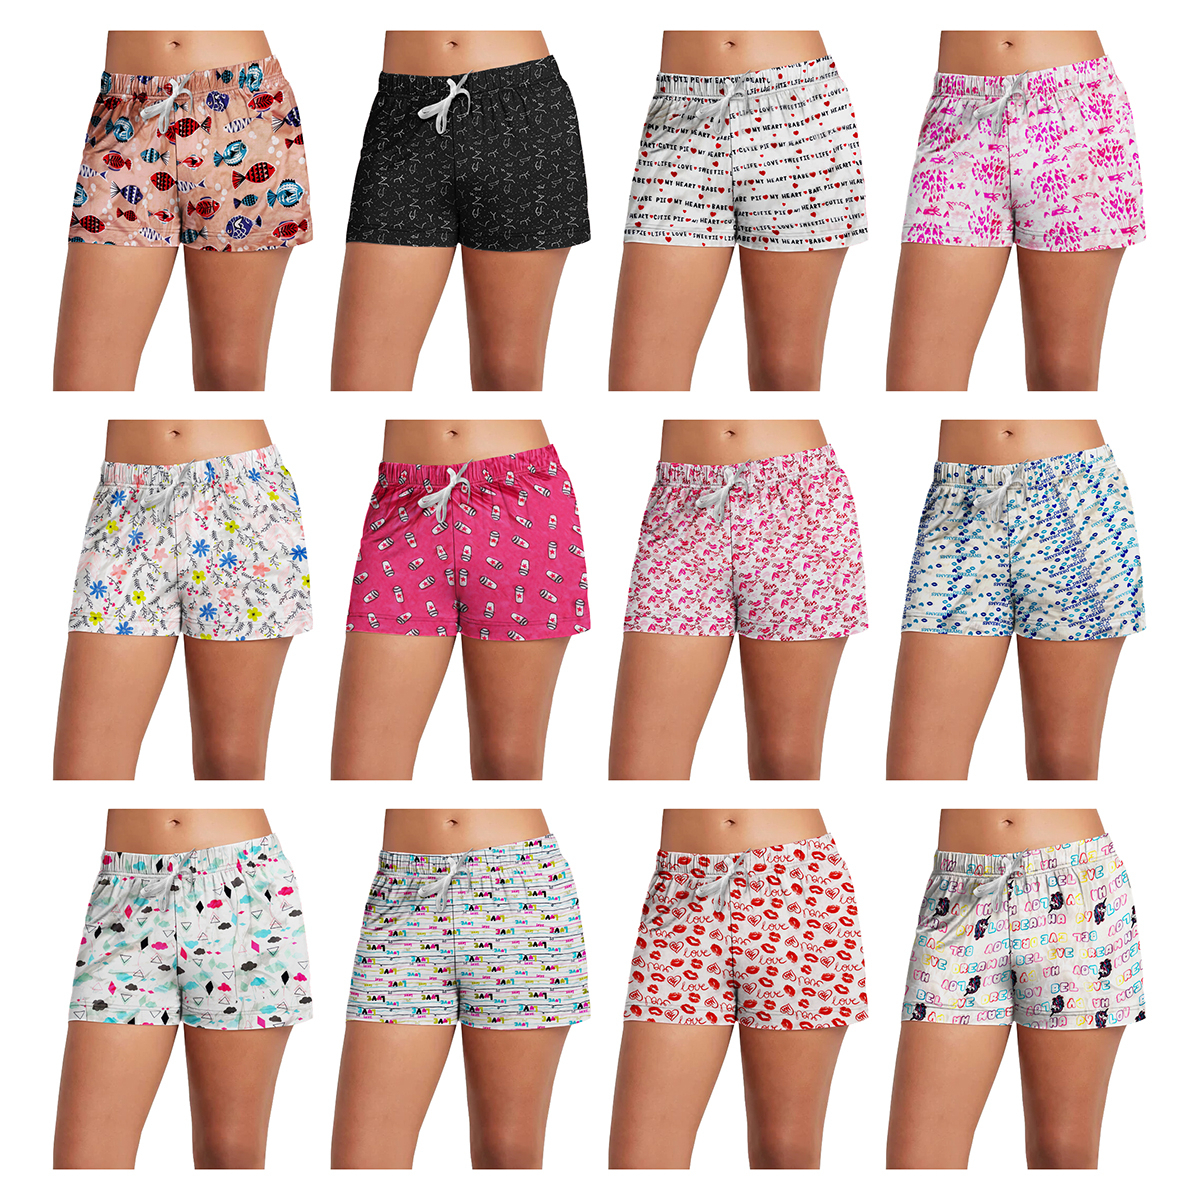 3-Pack : Women's Comfy Lounge Bottom Pajama Shorts W/Drawstring - Assorted Styles, Large